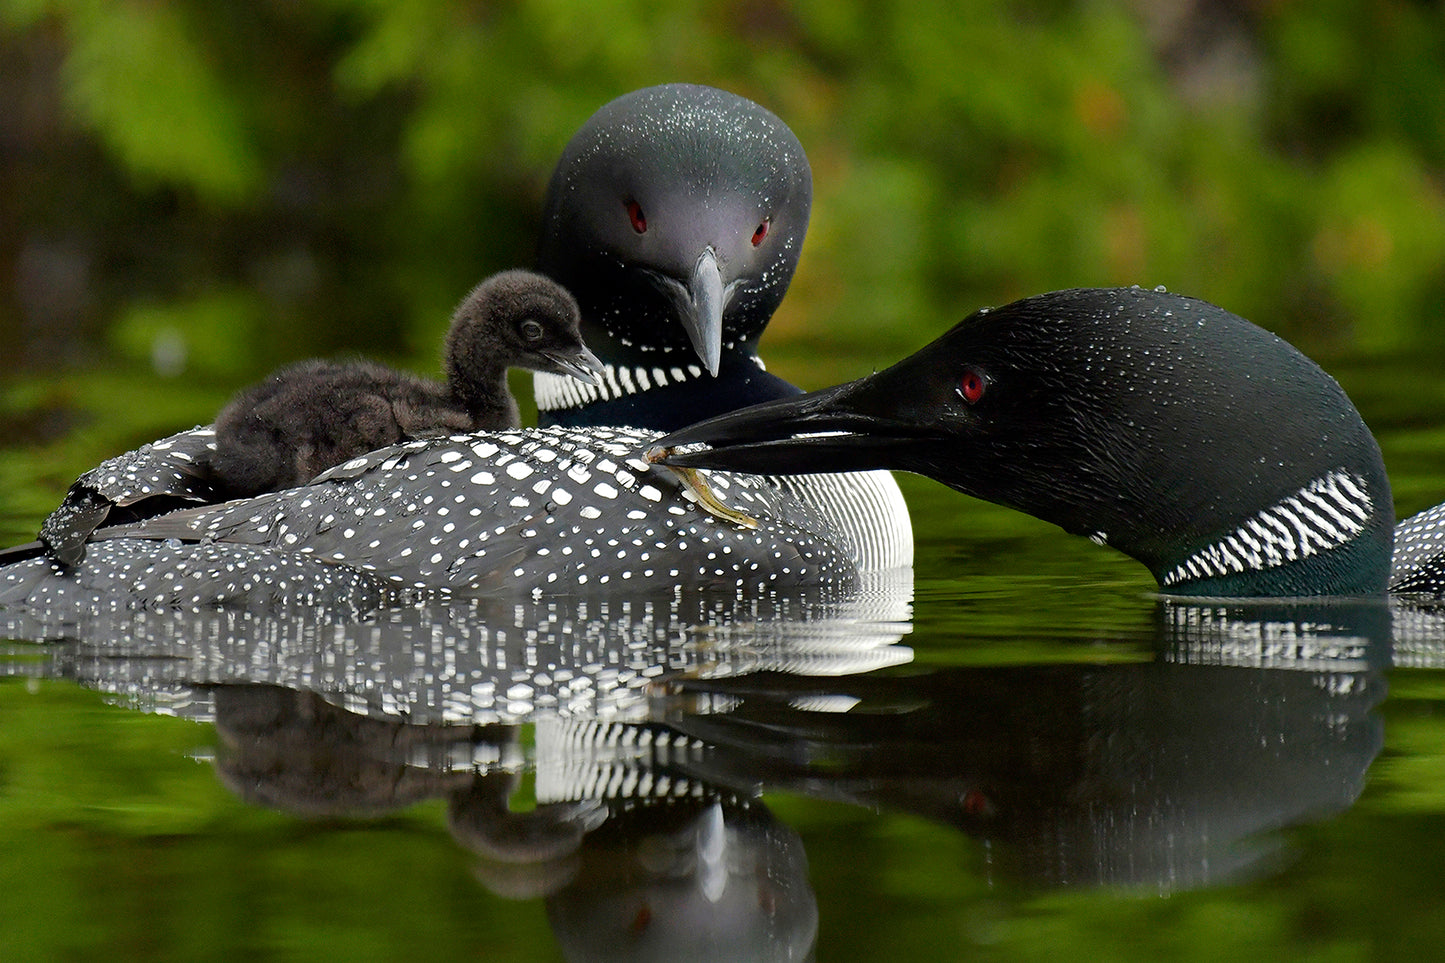 Michelle Valberg, Sharbot Lake Loons